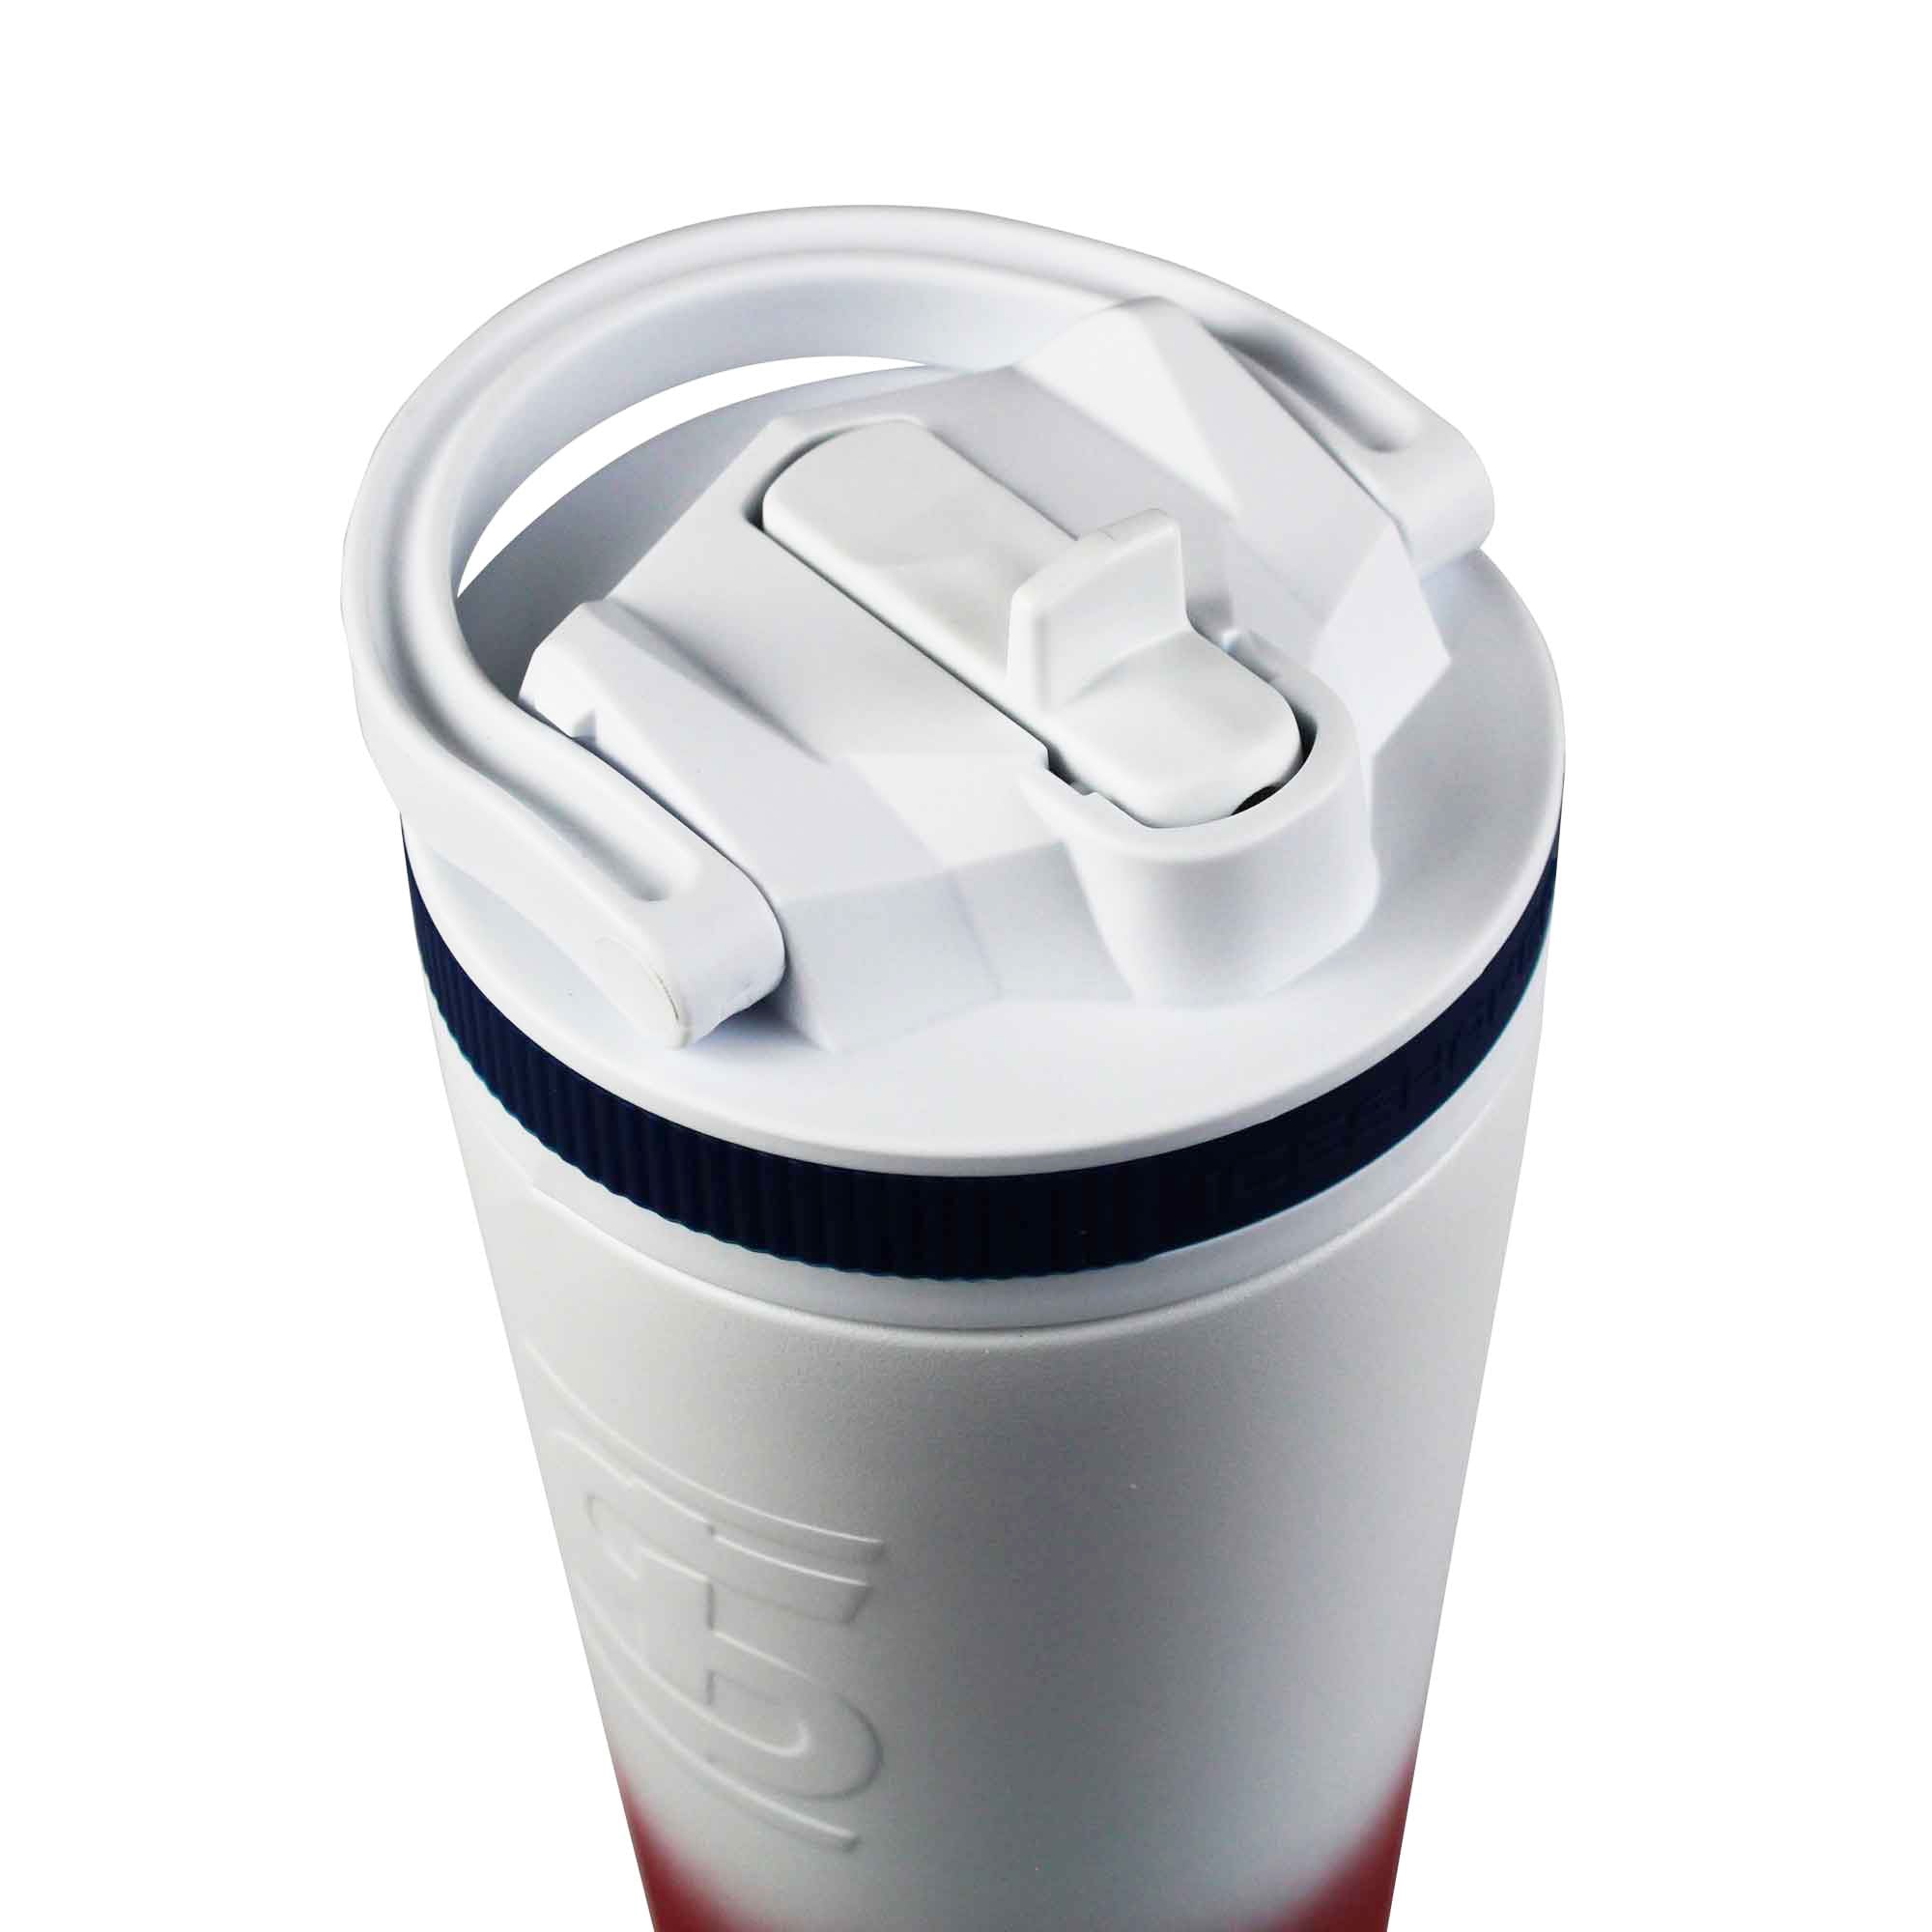 26oz Sport Bottle Lid & Internal Straw - White Lid with USA Band